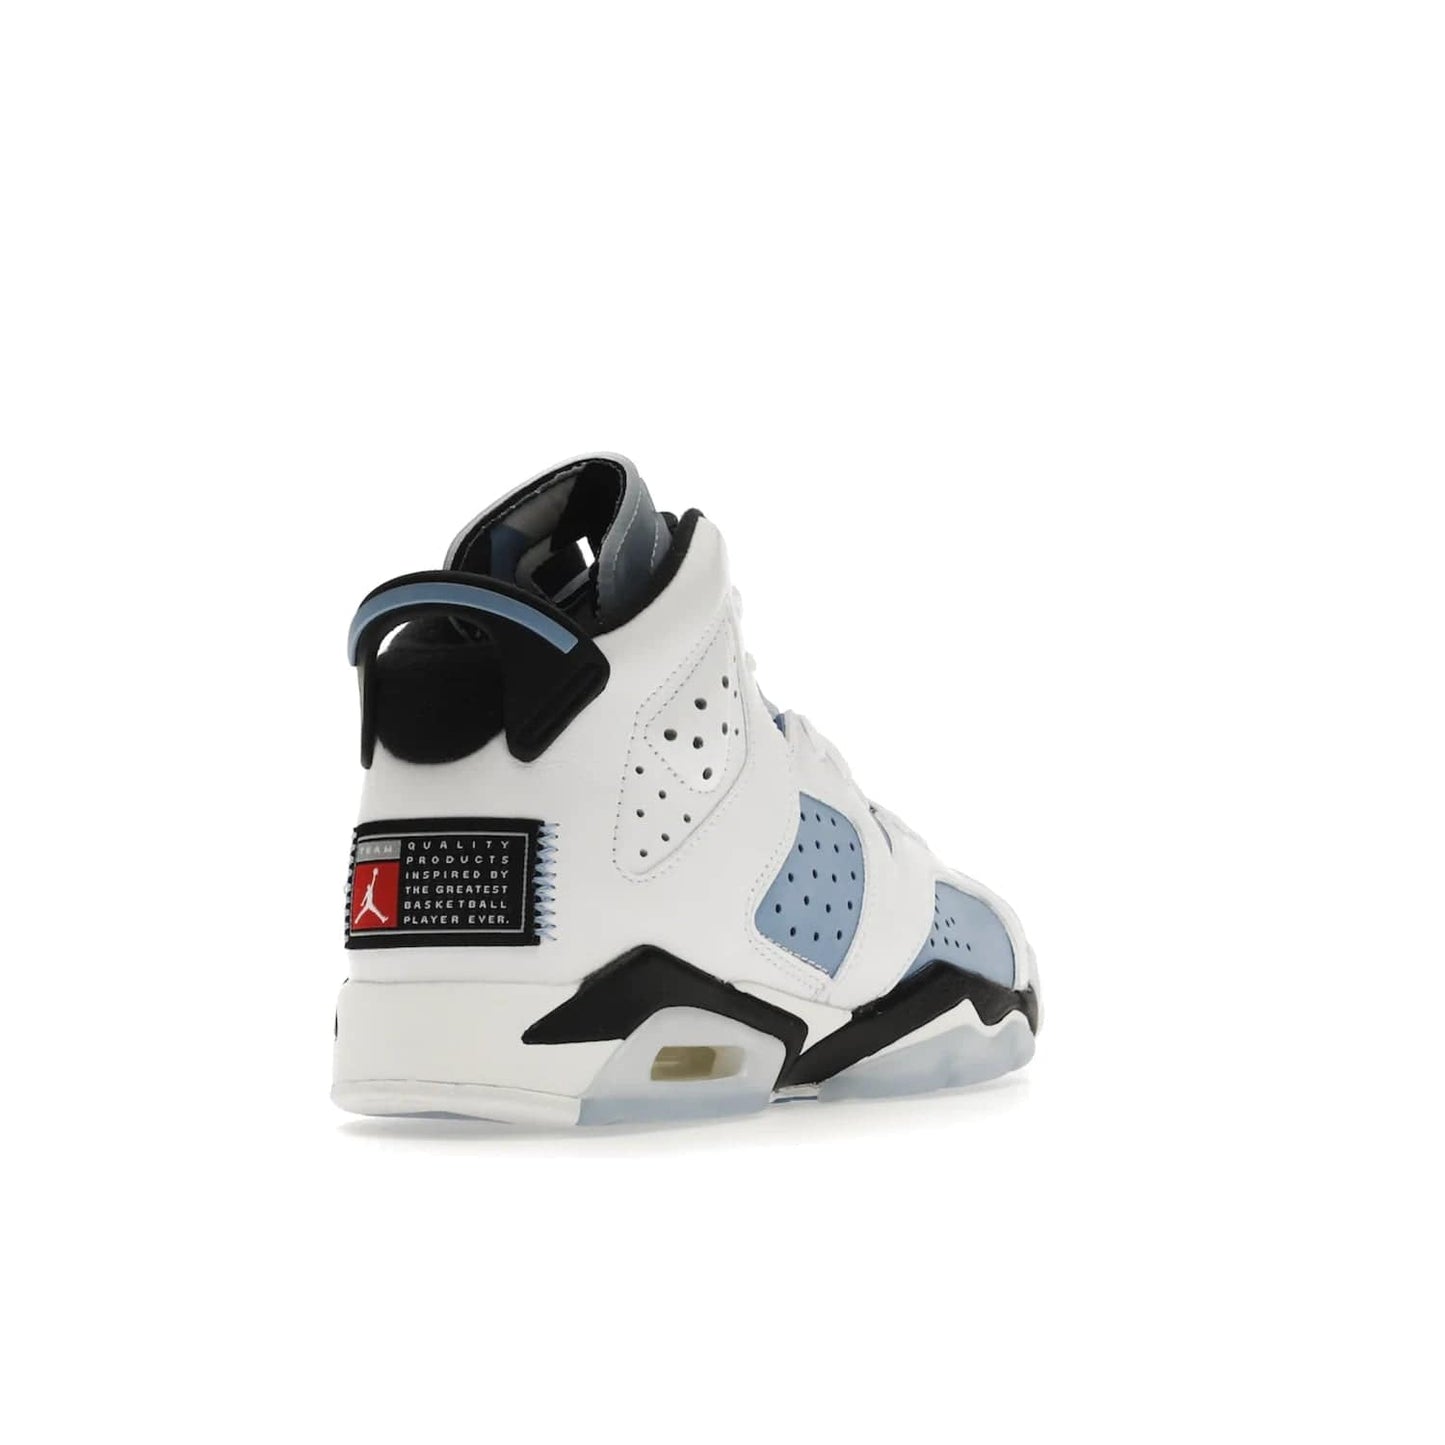 Jordan 6 Retro UNC White (GS) - Image 31 - Only at www.BallersClubKickz.com - Air Jordan 6 Retro UNC White GS: Michael Jordan alma mater, UNC Tar Heels, featuring colorway, nubuck, leather, Jumpman branding and a visible Air unit. Translucent blue/white outsole, perfect for completing sneaker rotation.